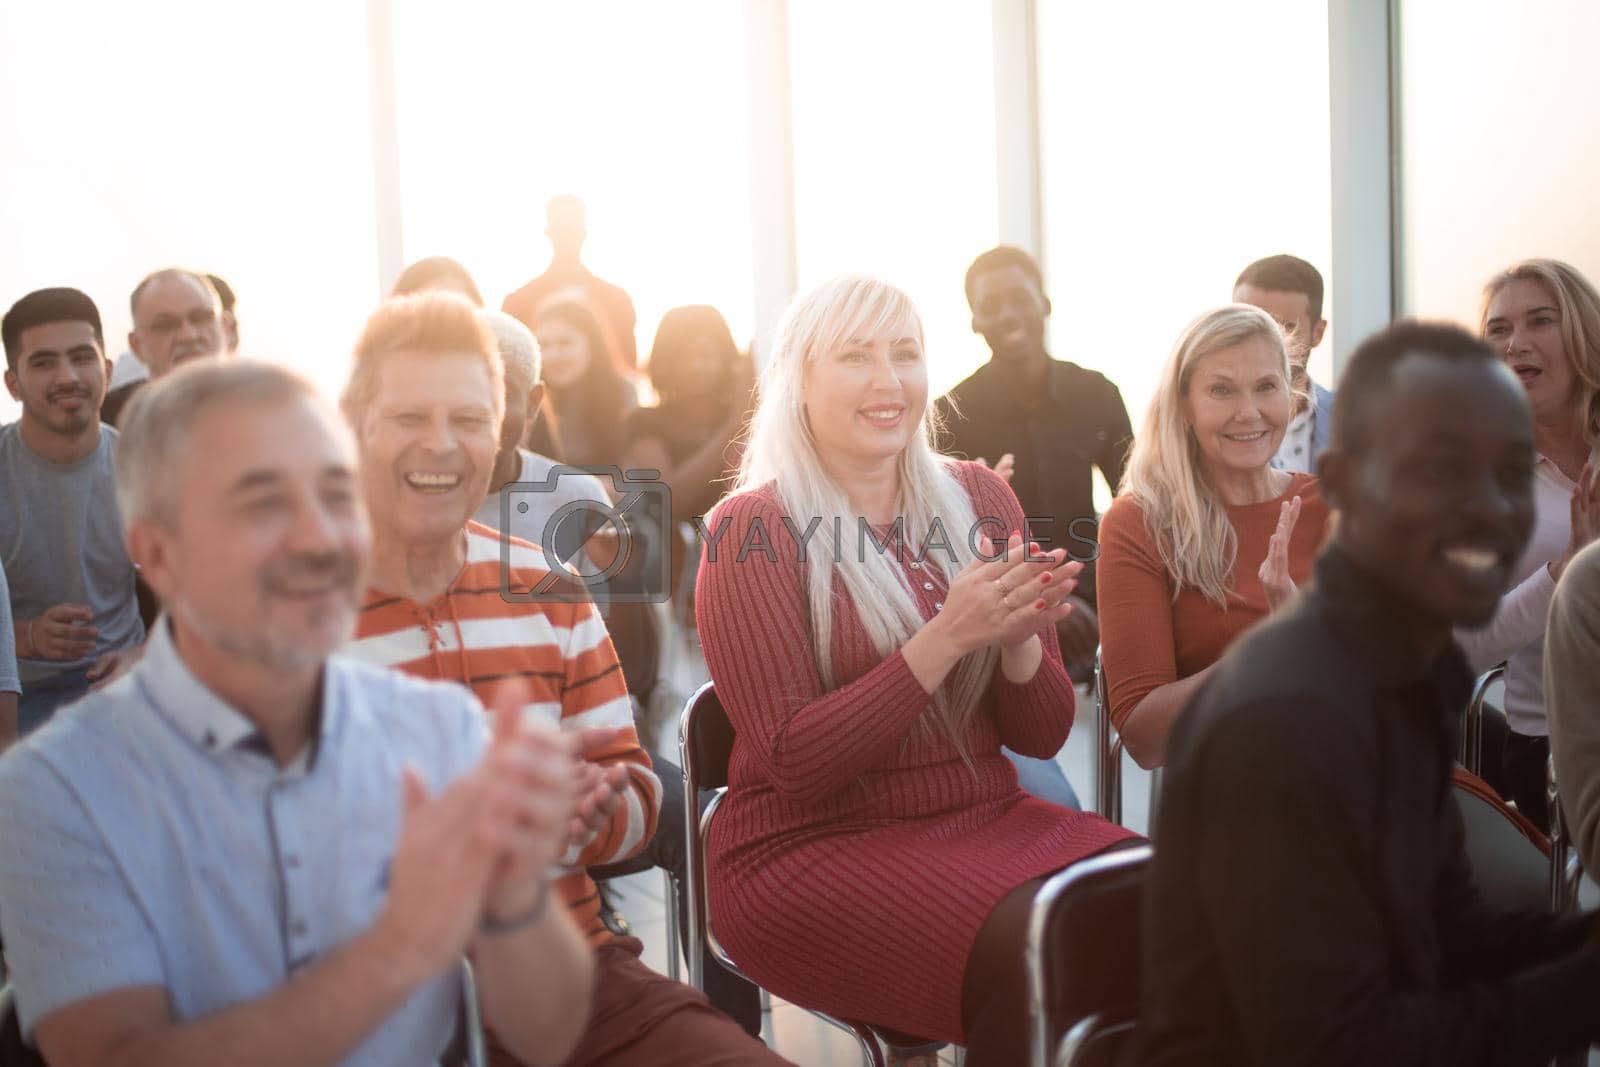 Royalty free image of Smiling audience applauding at a business seminar by asdf